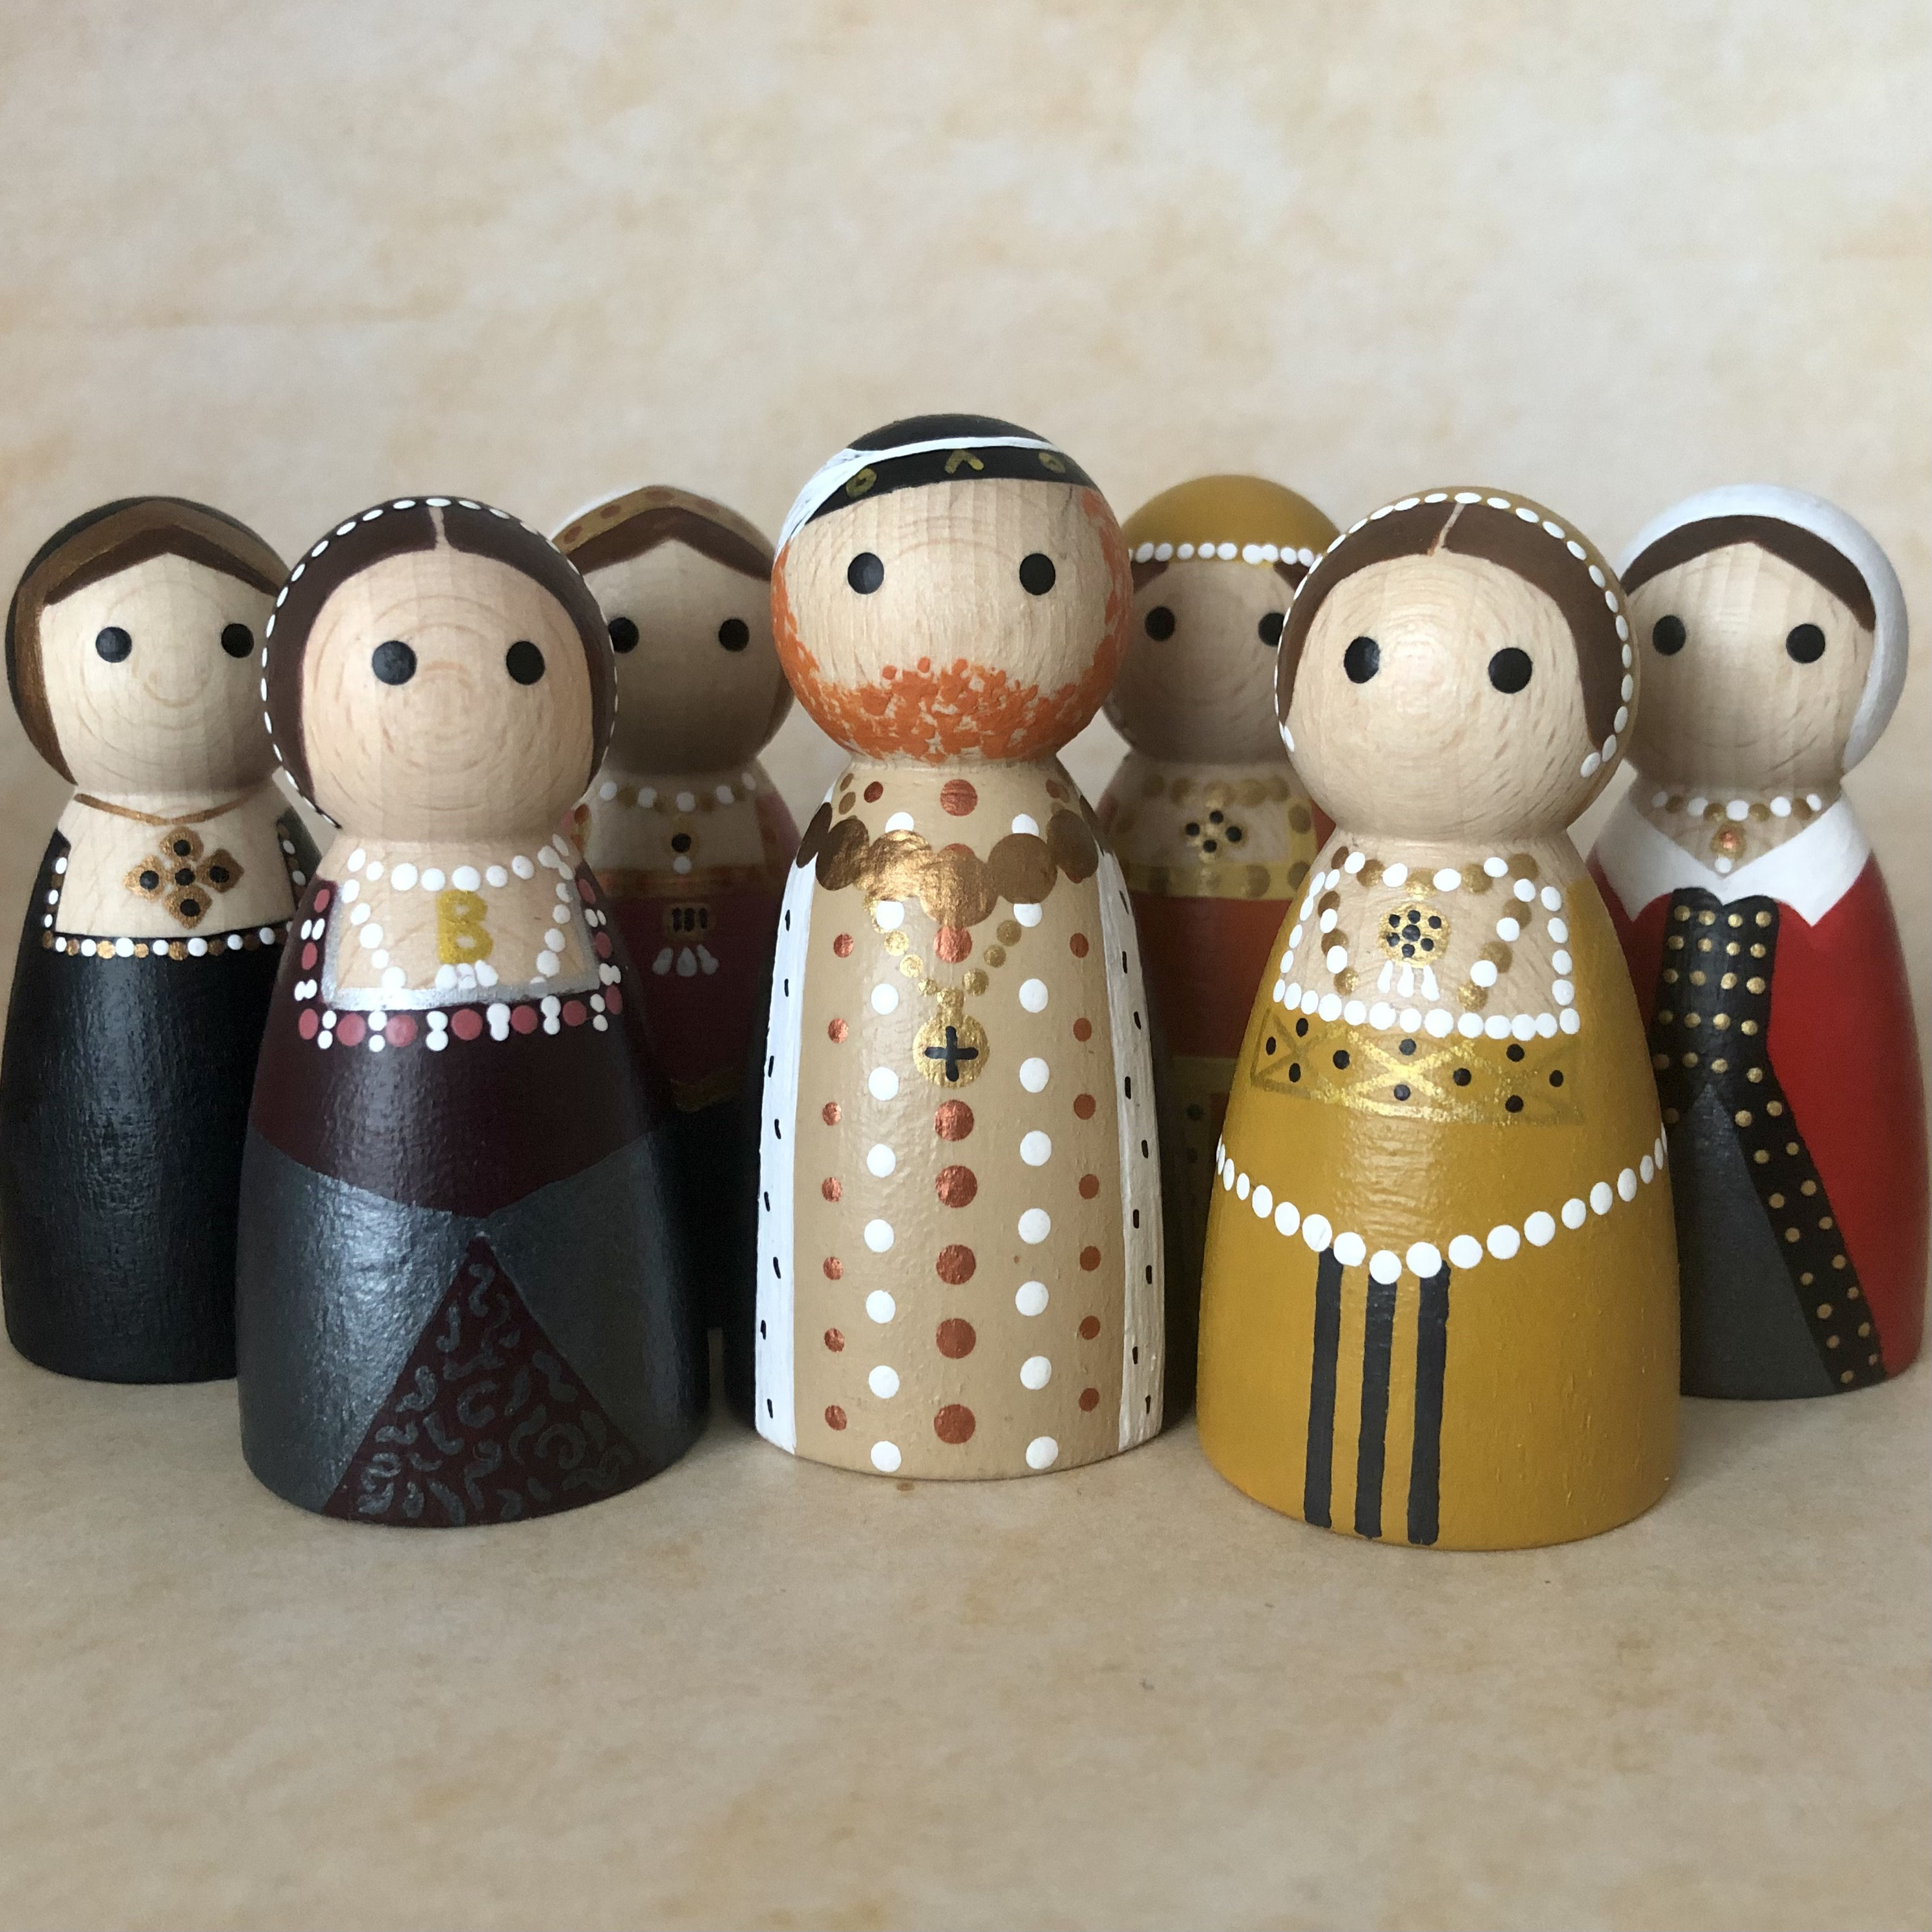 Peg Doll Hand Sewing Kit - Knights - A Child's Dream